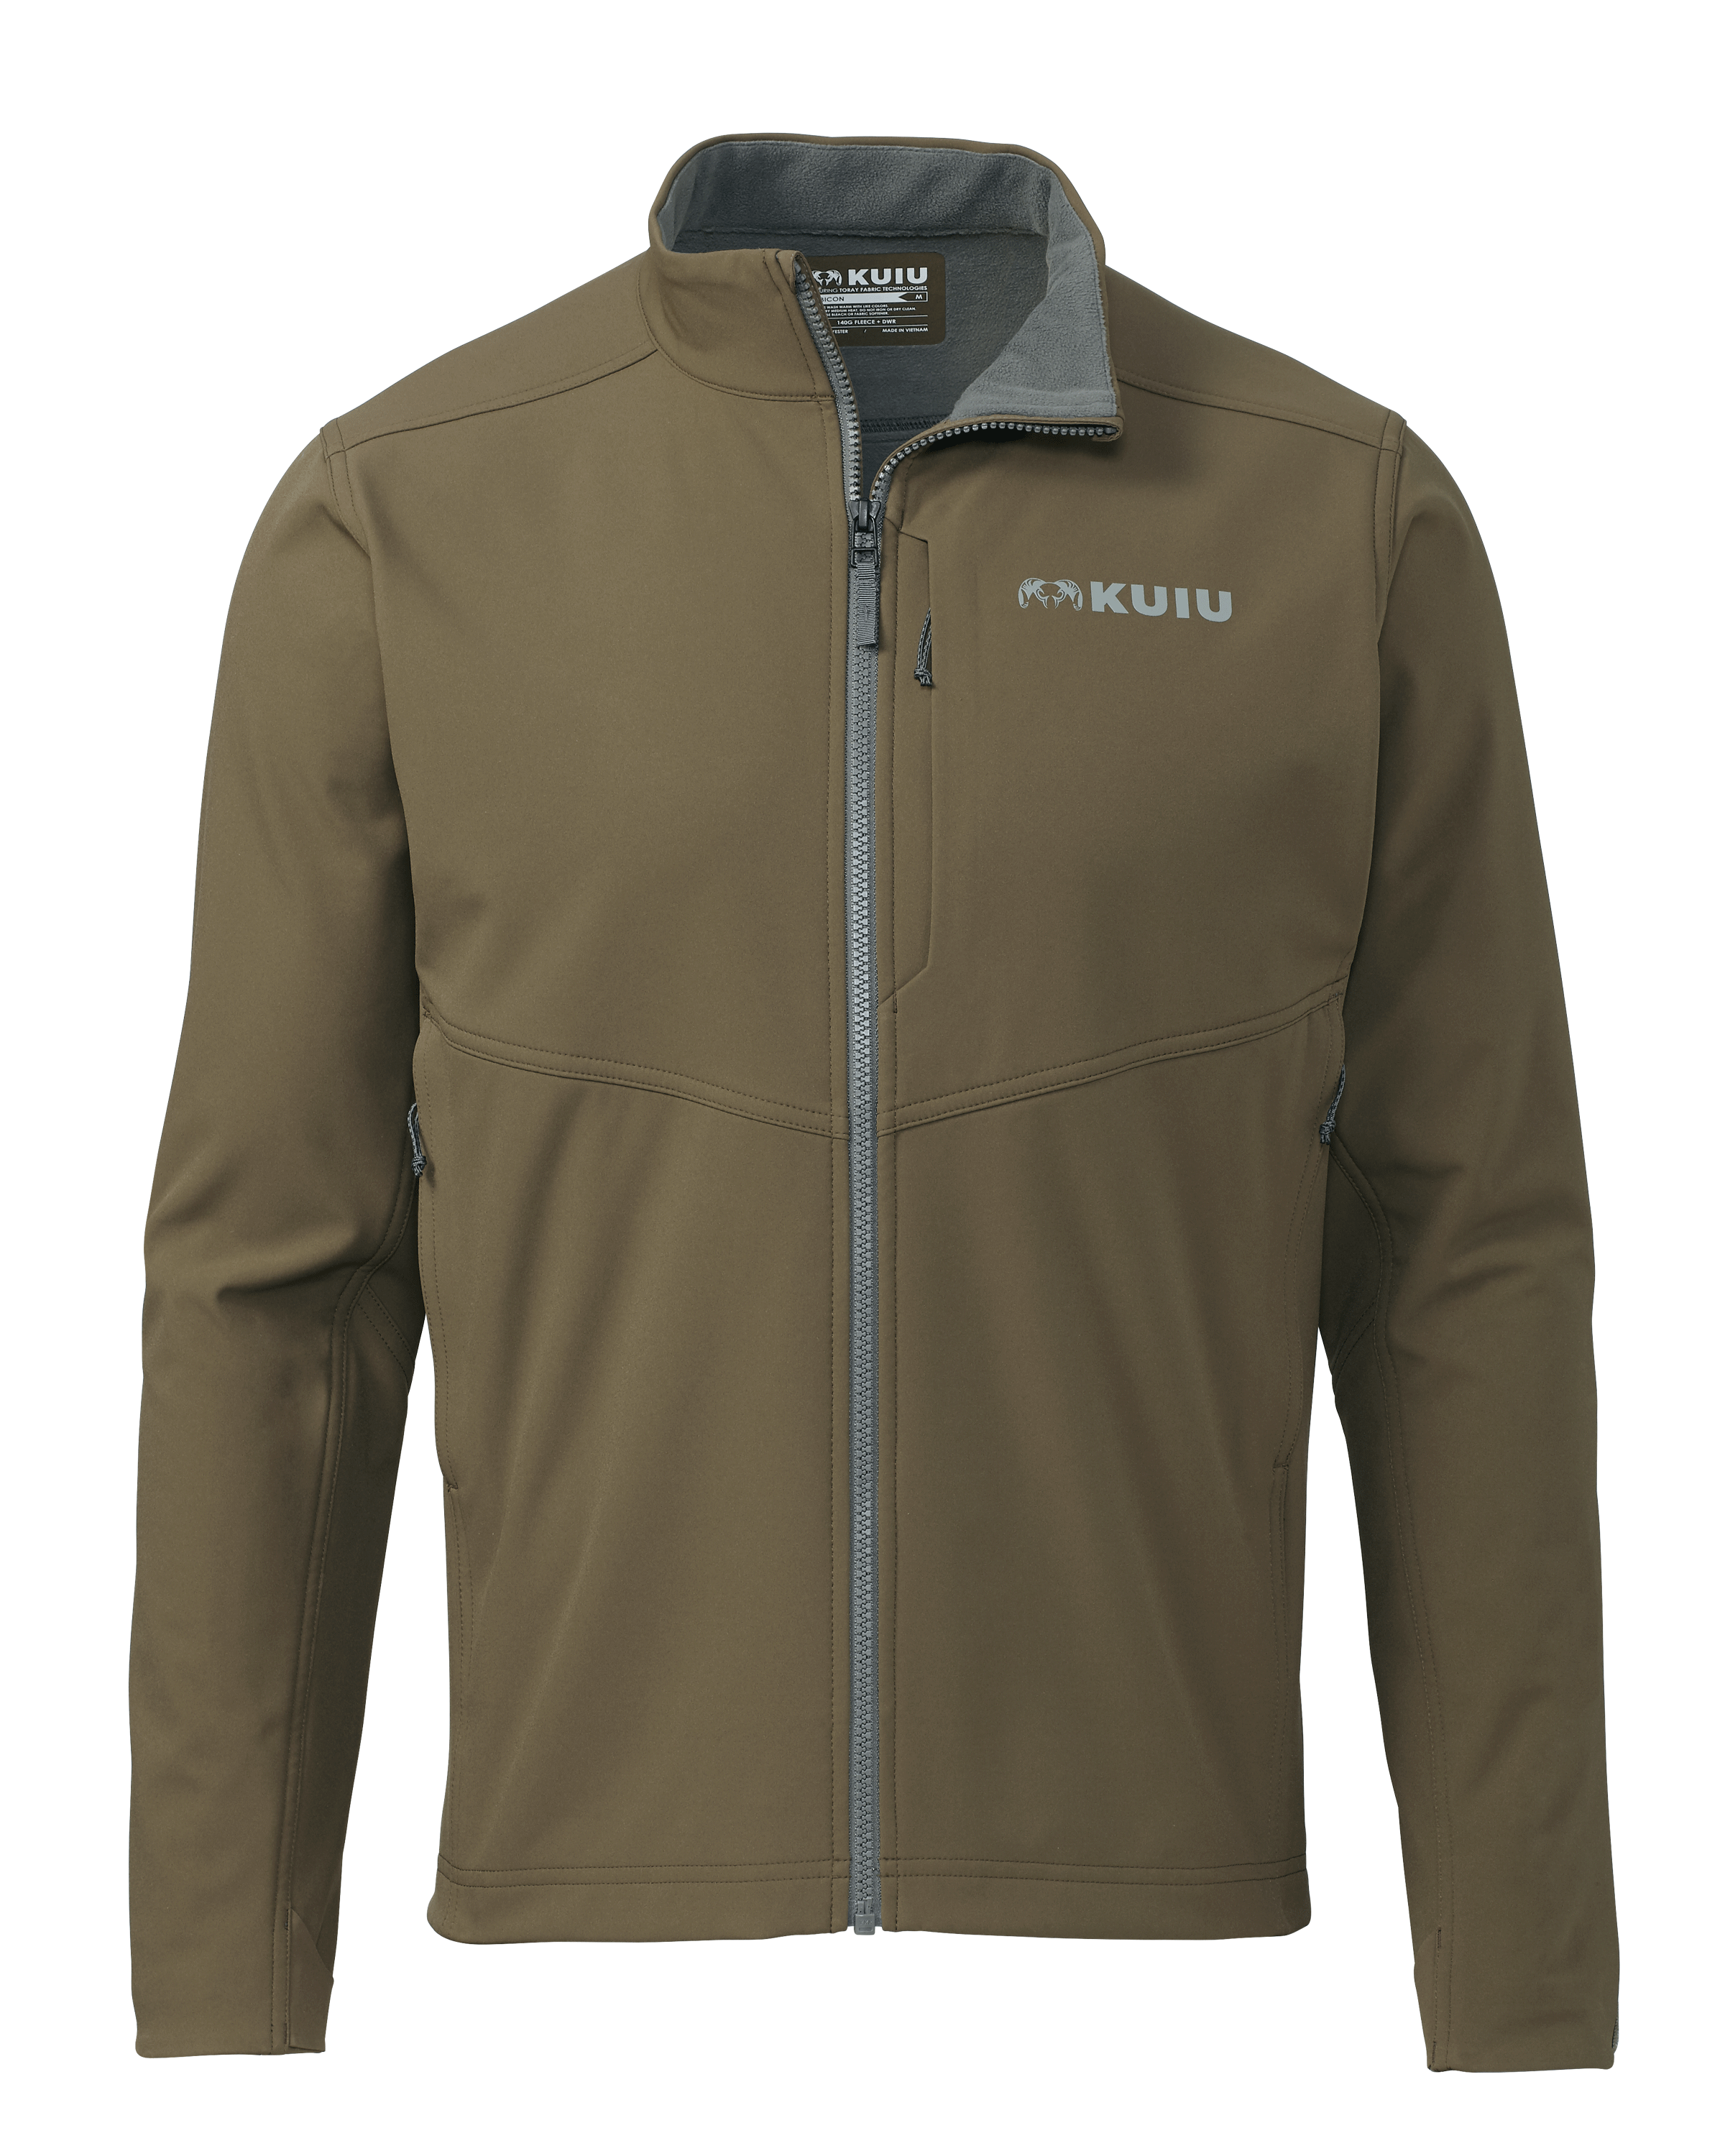 KUIU Rubicon Hunting Jacket in Bourbon | Size Small